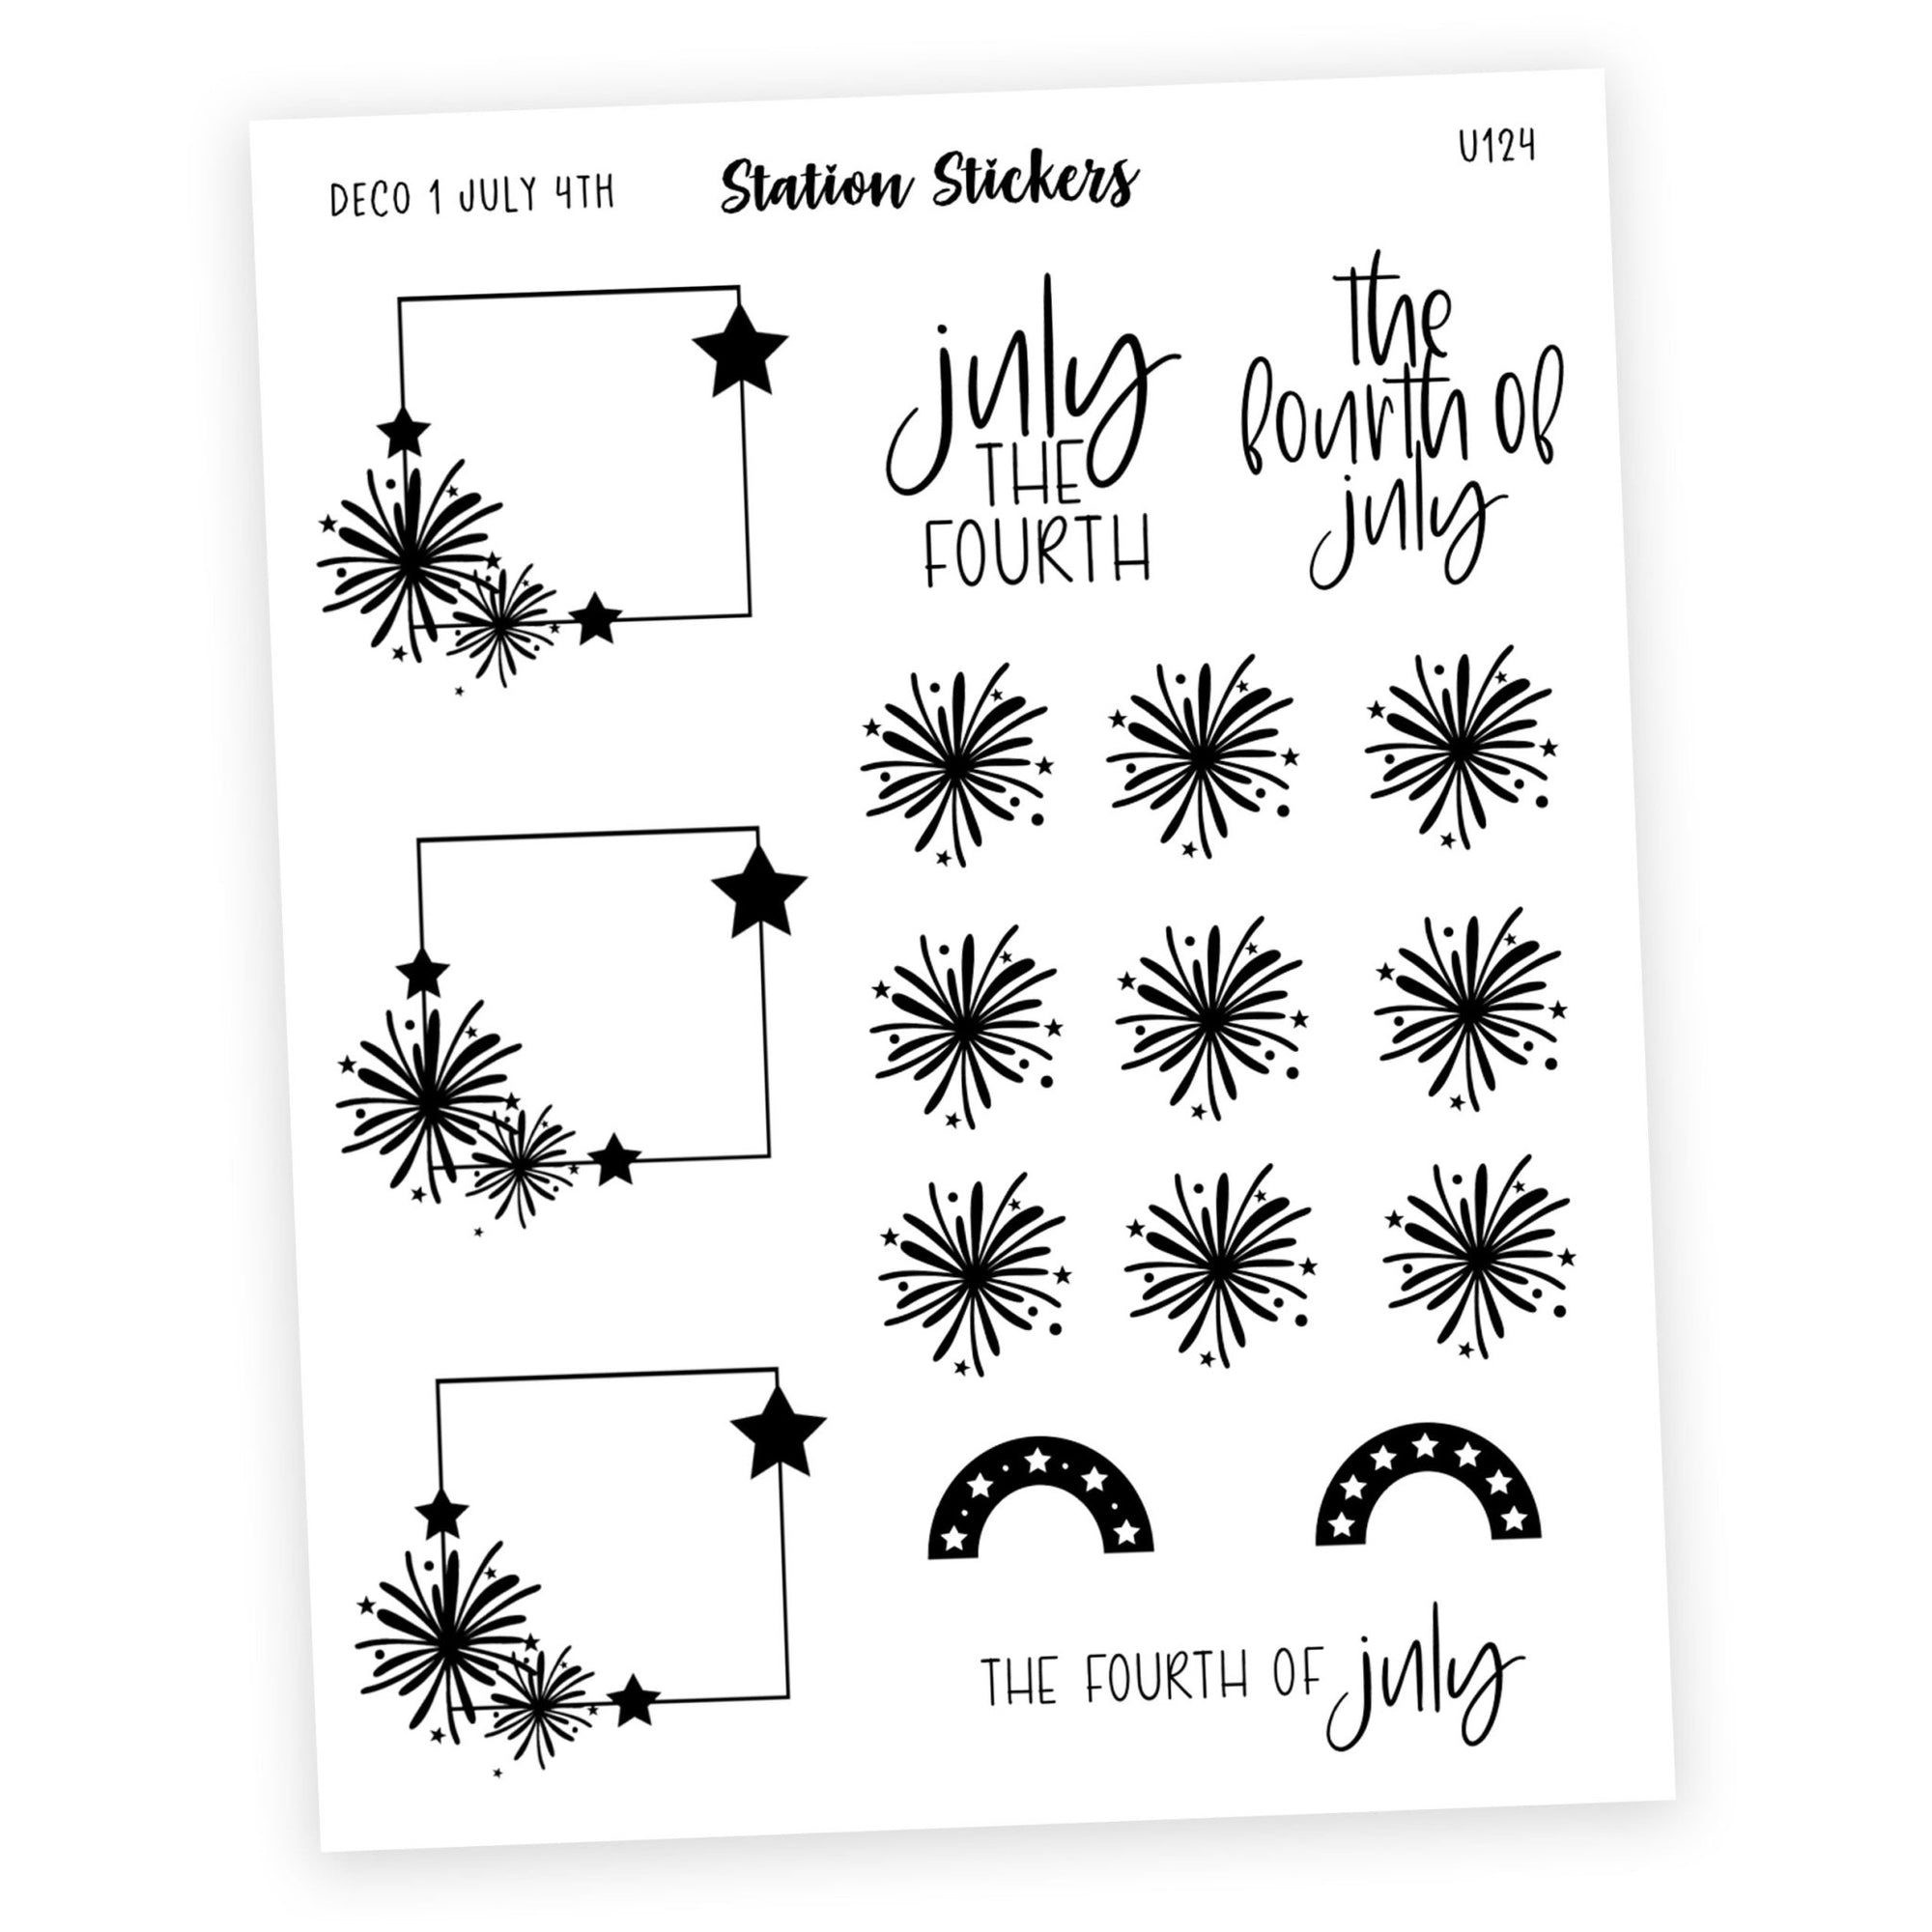 DECO 1 • JULY 4th - Station Stickers